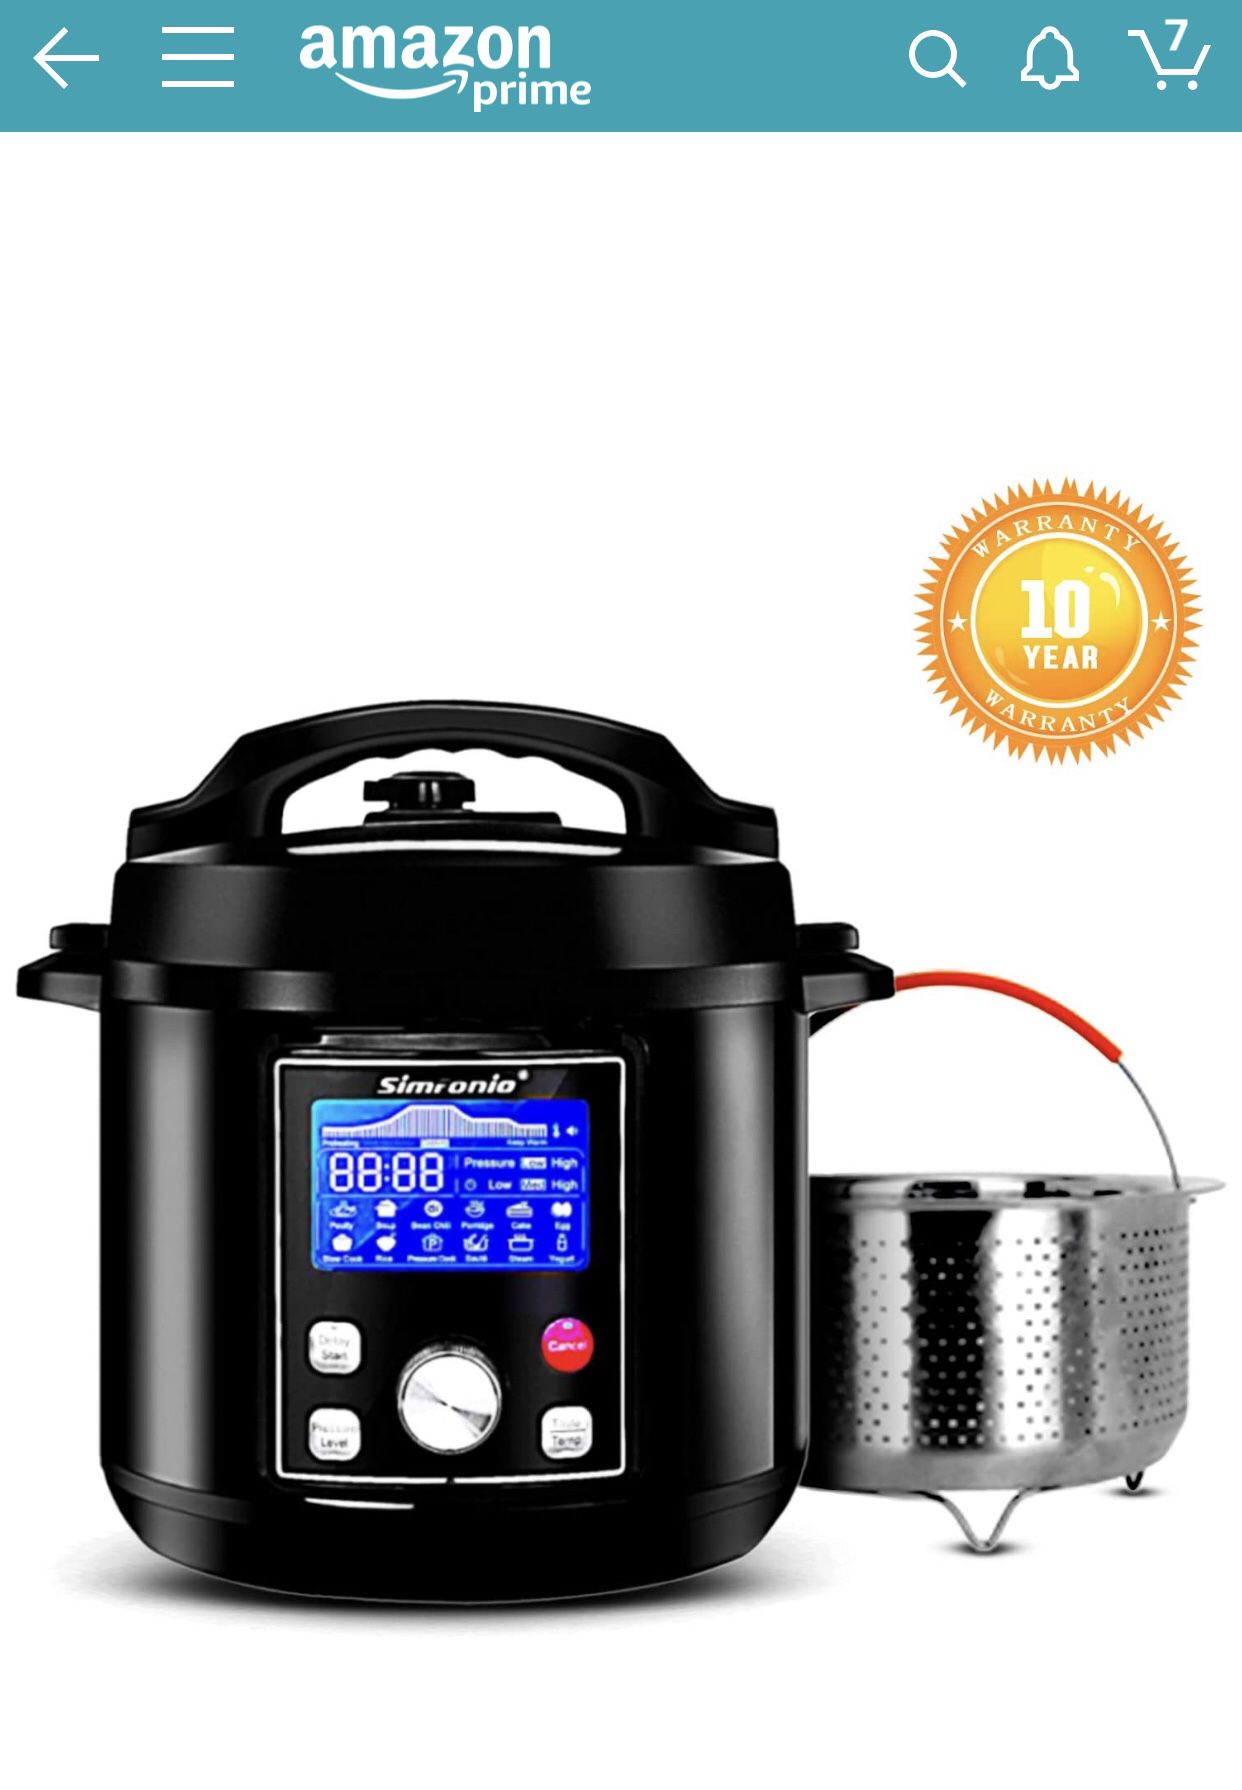 Simfonio Electric Pressure Cooker 6QT 10 in 1 Olla reina - Olla Multiuso Stainless Steel Hot Pot